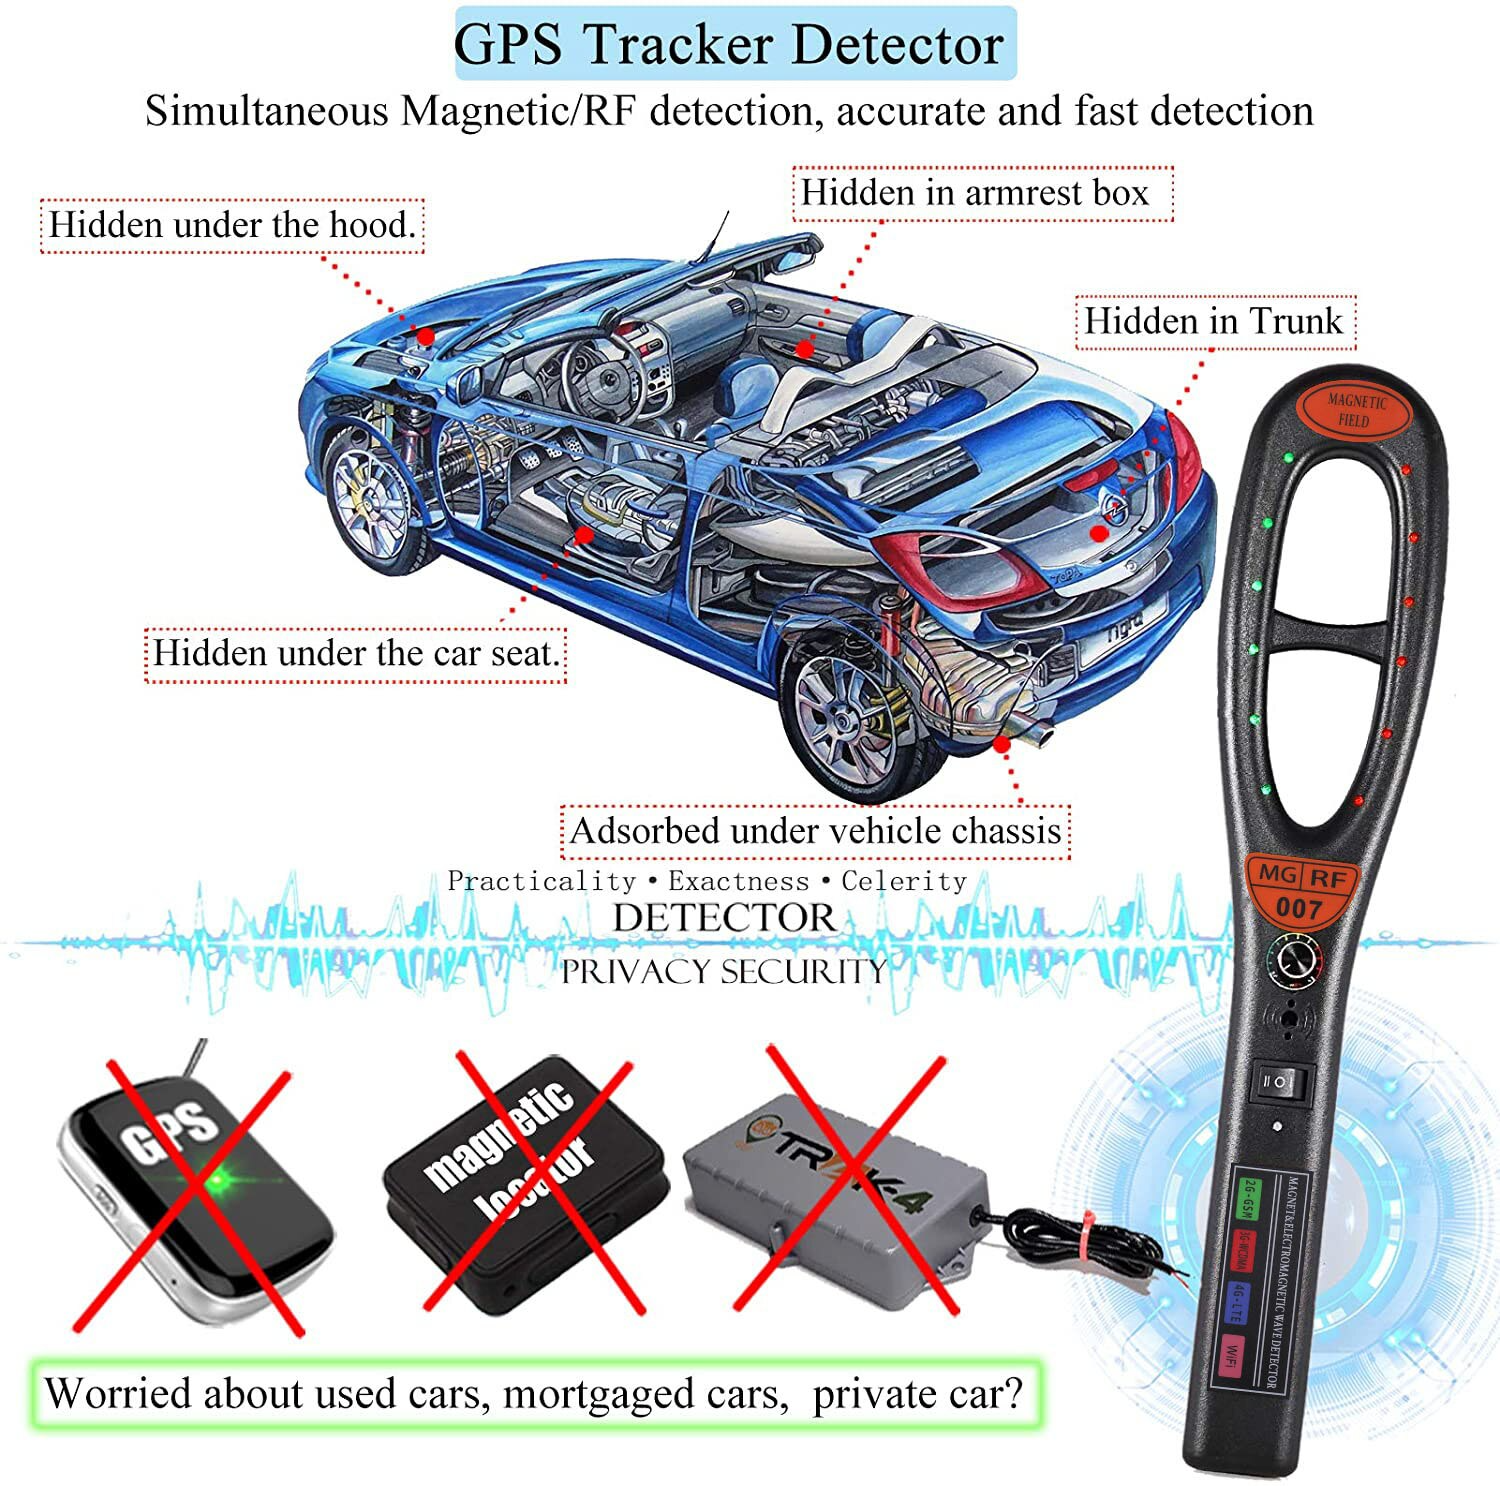 GPS Tracker Detector For Car - Professional Device - SKINMOZ MARKET